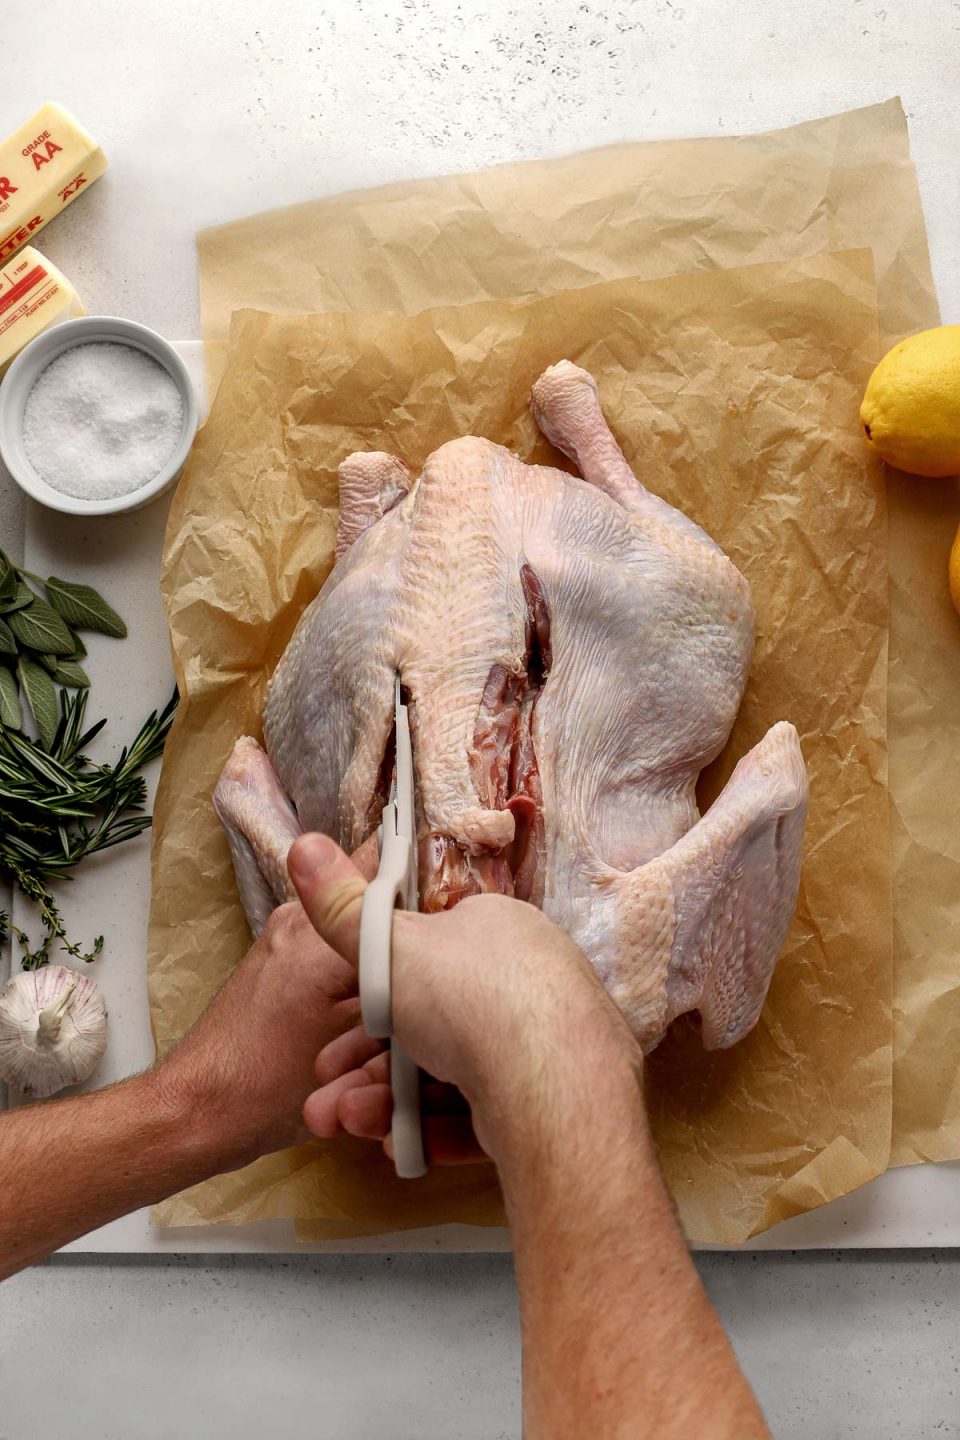 How to Spatchcock a Turkey, step 2: A man's hands hold a pair of sharp kitchen shears in one hand and hold the whole turkey's backbone with the other. He is using the kitchen shears to carefully snip alongside both sides of the turkey's backbone working to remove it completely. The turkey rests a top two sheets of brown crumpled parchment paper that sit atop a white cutting board. Two lemons, a white ramekin filled with kosher salt, two whole garlic bulbs, two sticks of butter, and fresh herbs surround the raw whole turkey.